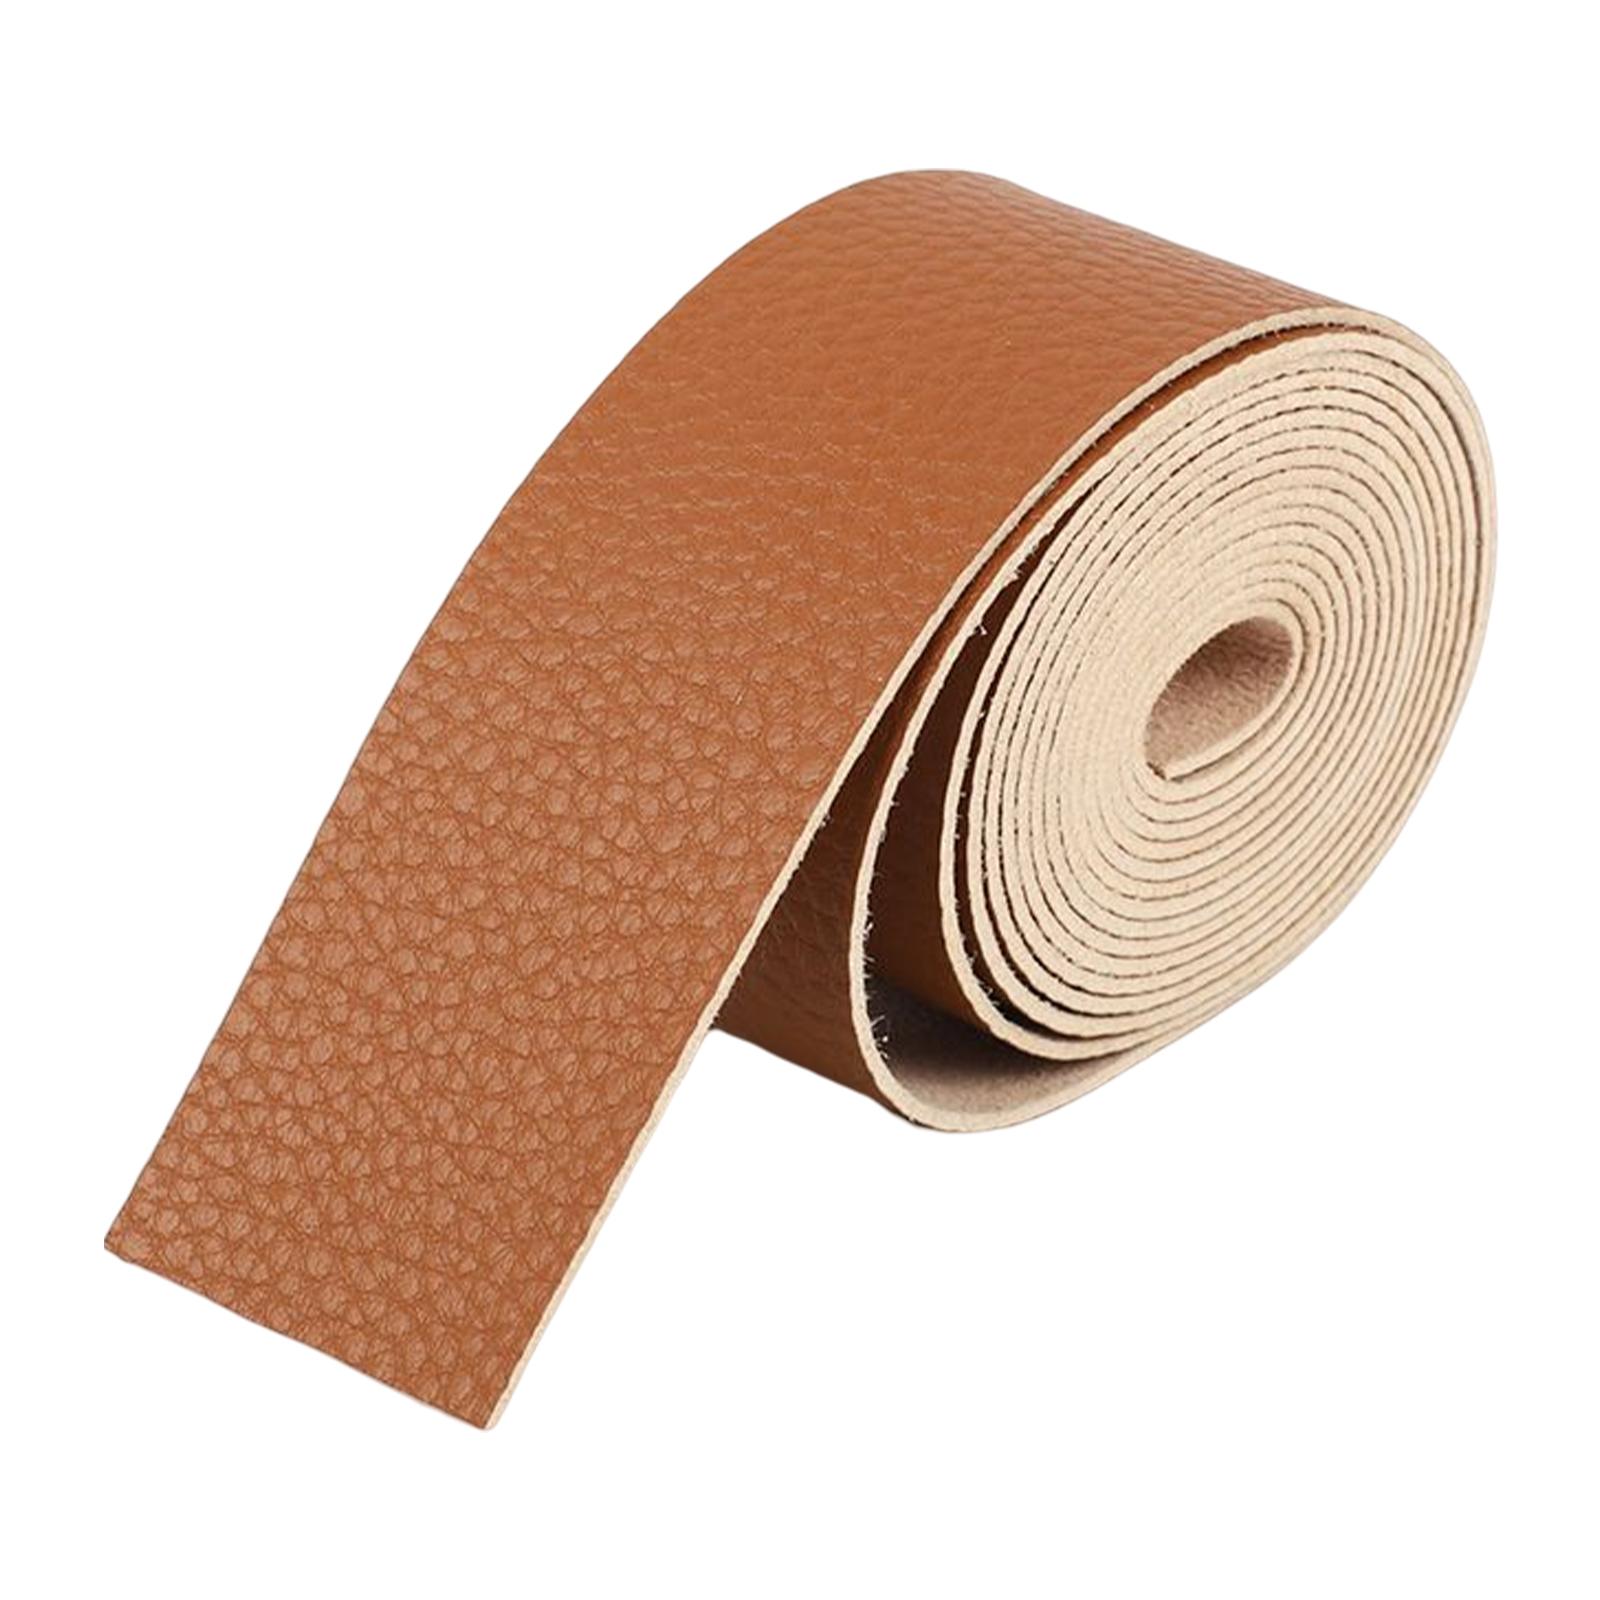 PU Leather Strap Strips Decorative Supplies for Workshop Purse Tooling Brown